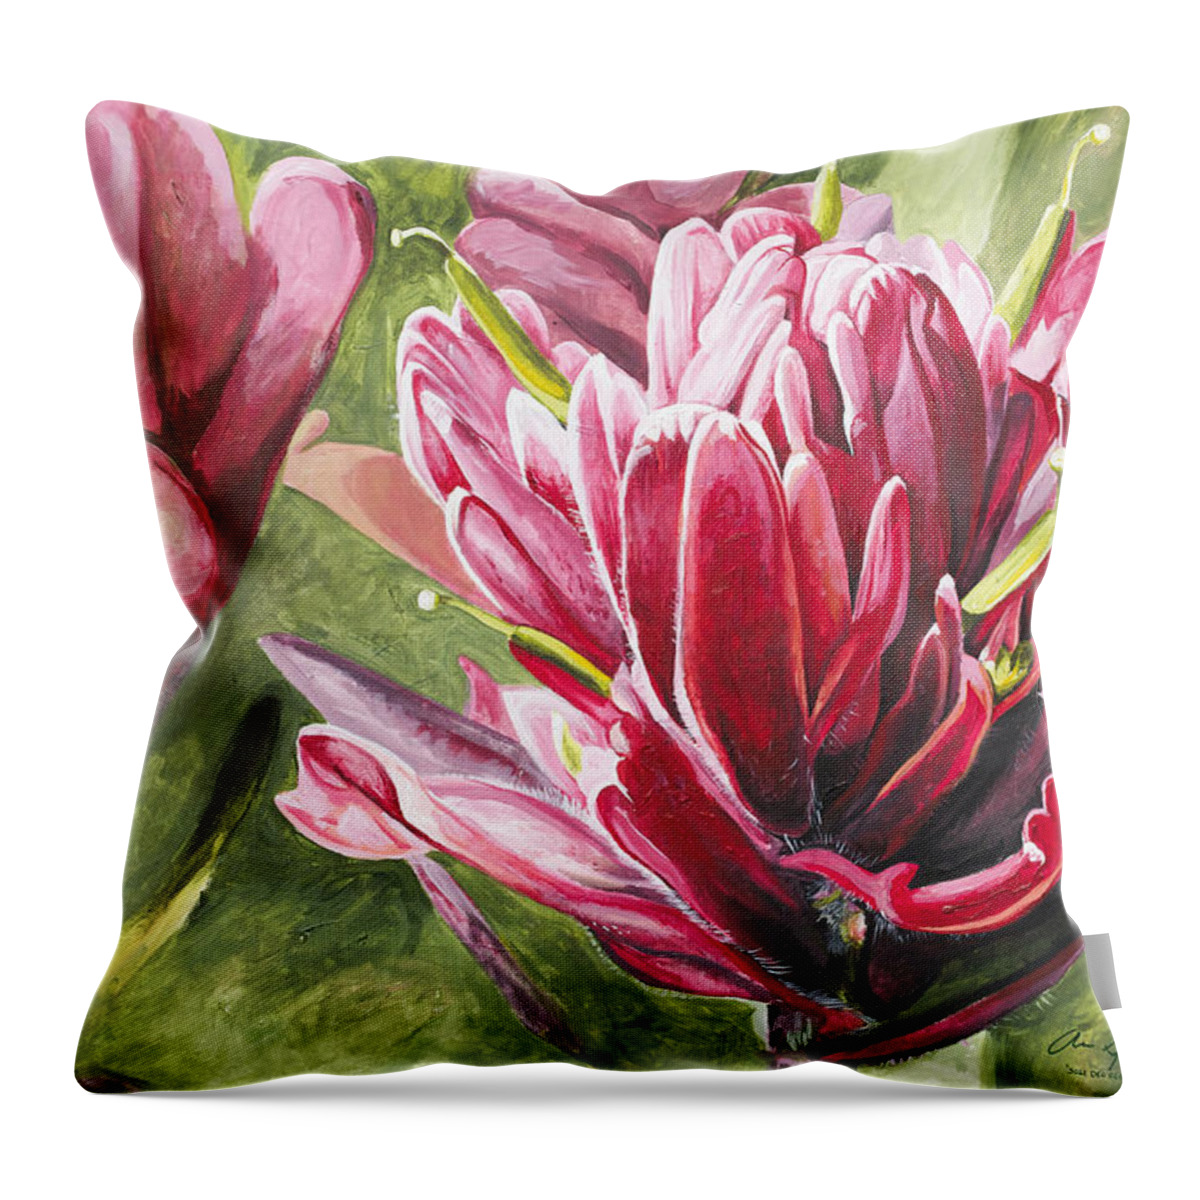 Wyoming Throw Pillow featuring the painting Indian Paintbrush by Aaron Spong